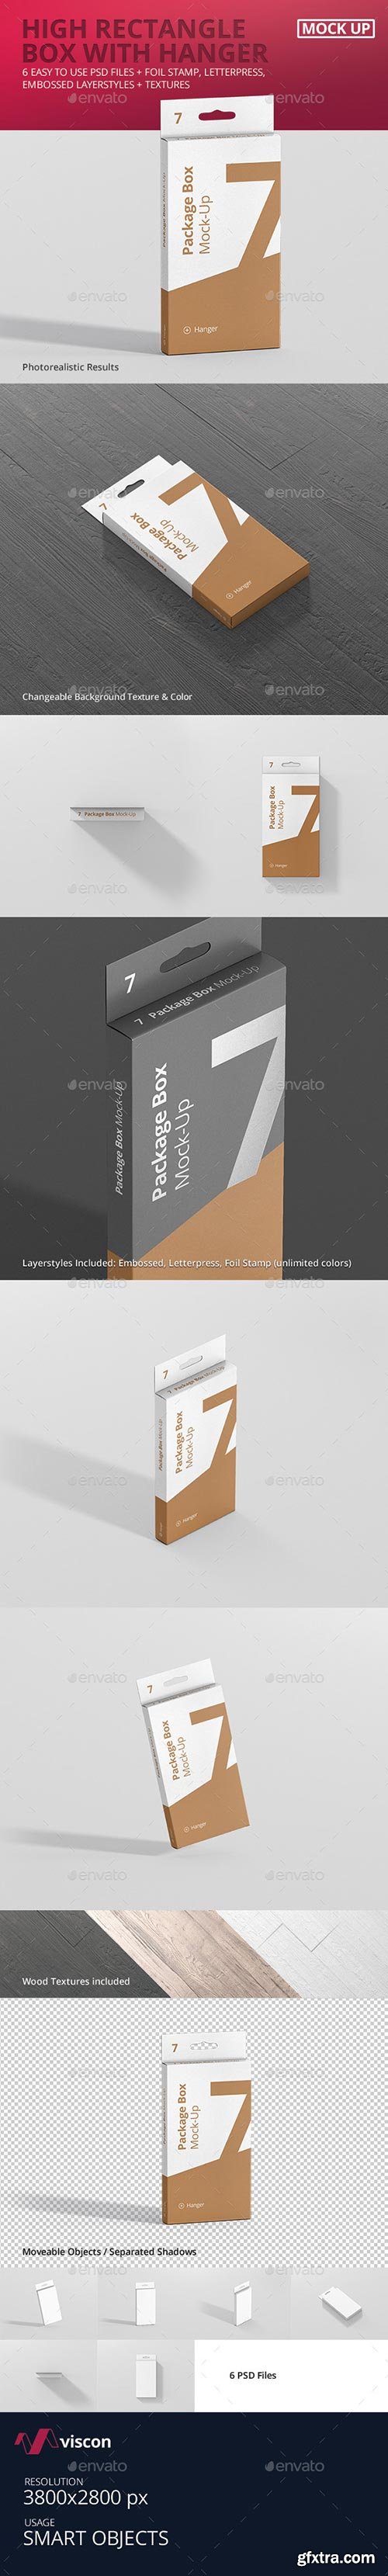 Graphicriver - Package Box Mock-Up - High Rectangle with Hanger 18094430